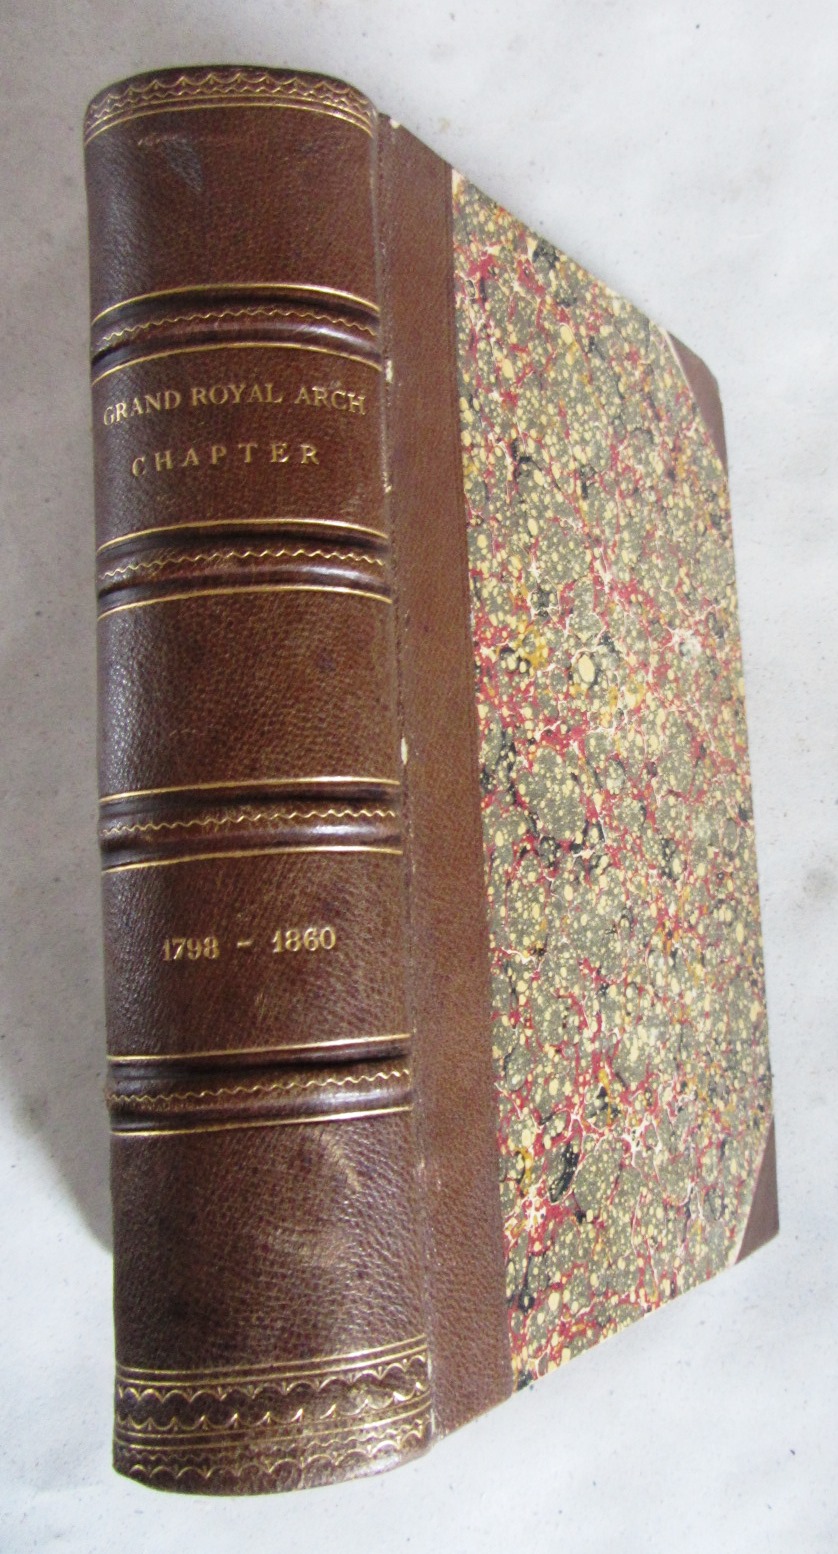   Proceedings of the Grand Royal Arch Chapter of Massachusetts, From its Organization, 1798-1860.  I. Volume ... II Parts. 